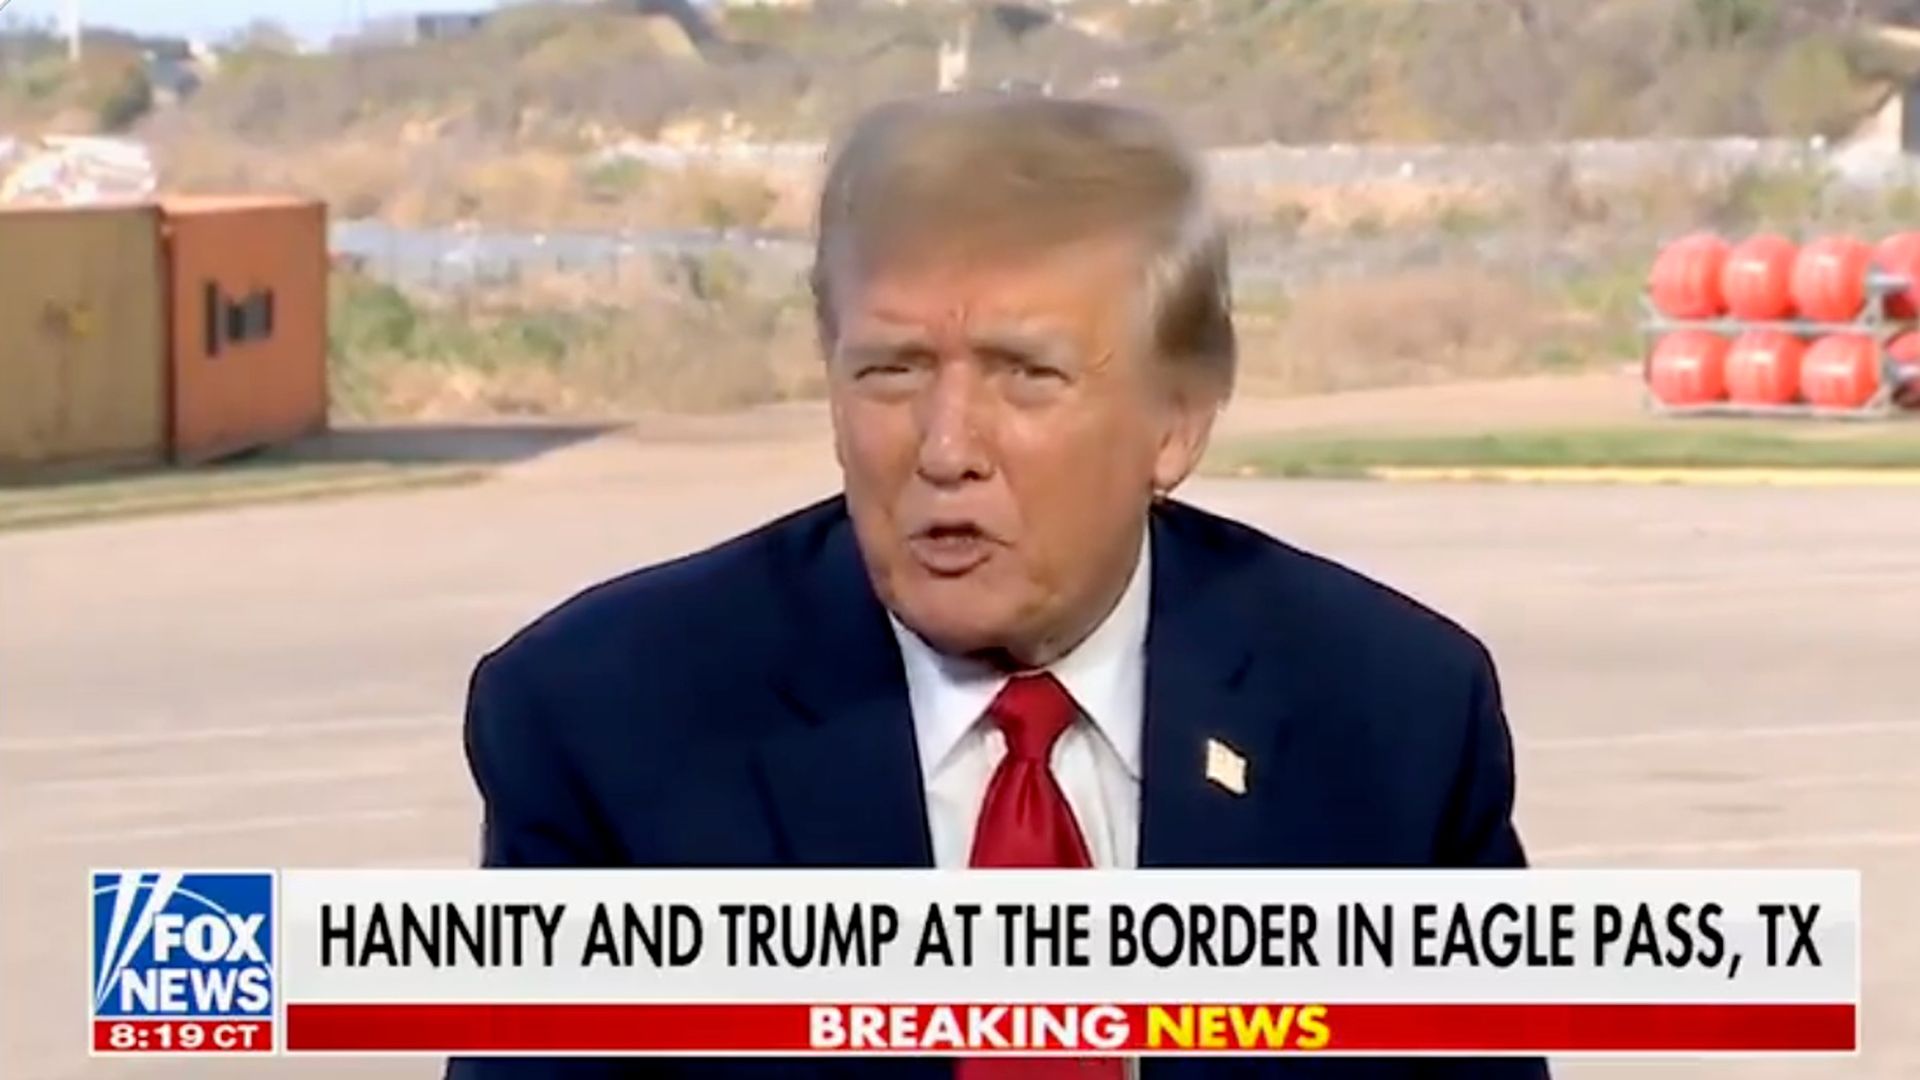 Former President Trump speaking during his interview on Fox News' "Hannity" at Eagle Pass, Texas, on Thursday.